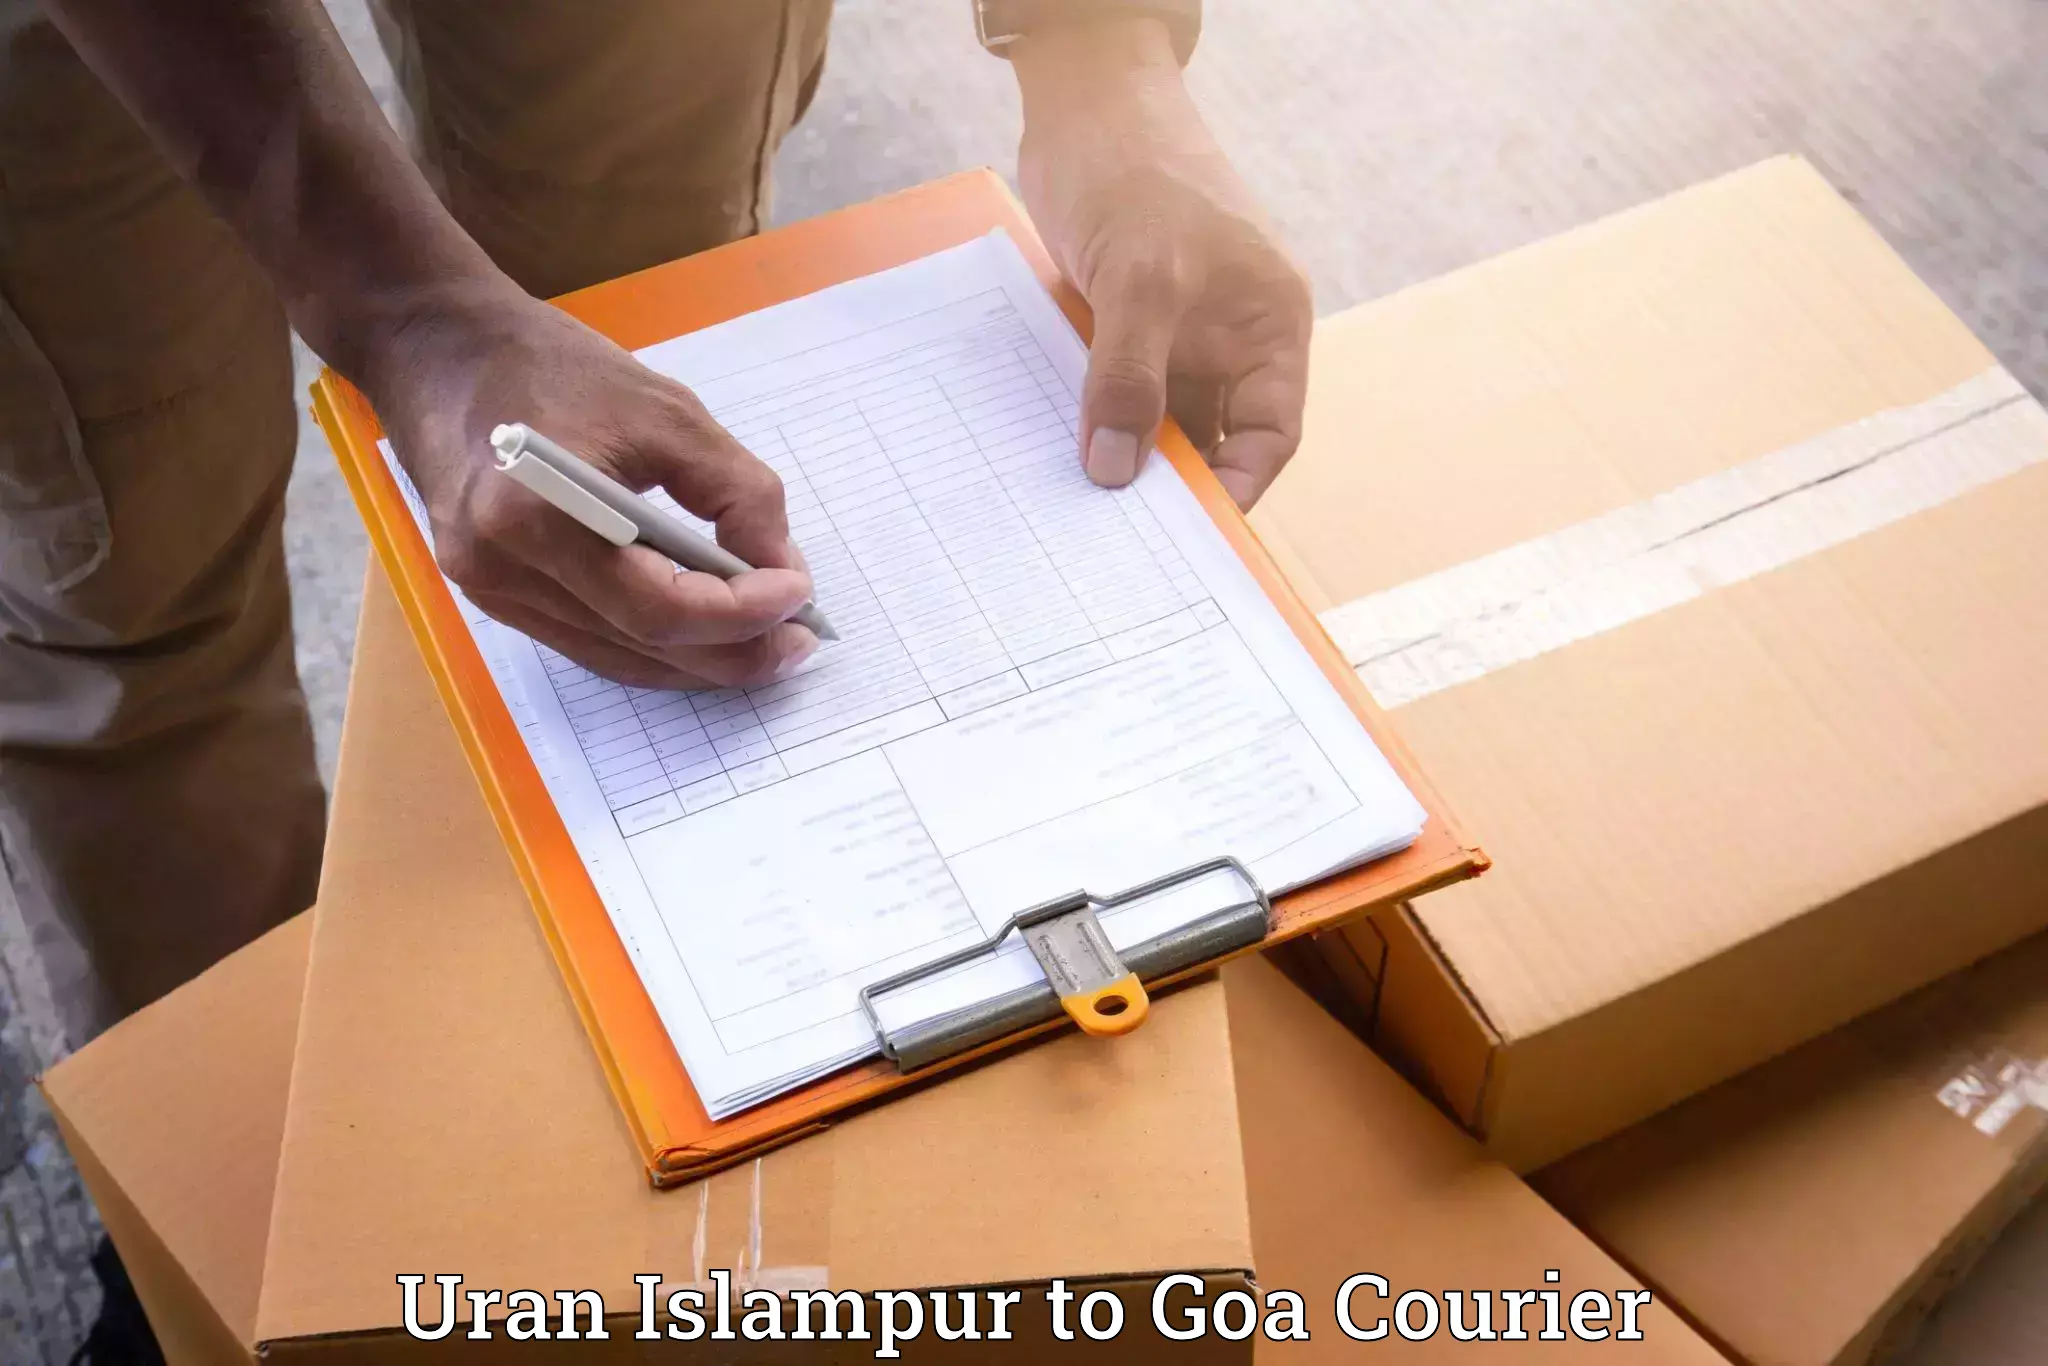 Quality relocation services in Uran Islampur to Mormugao Port